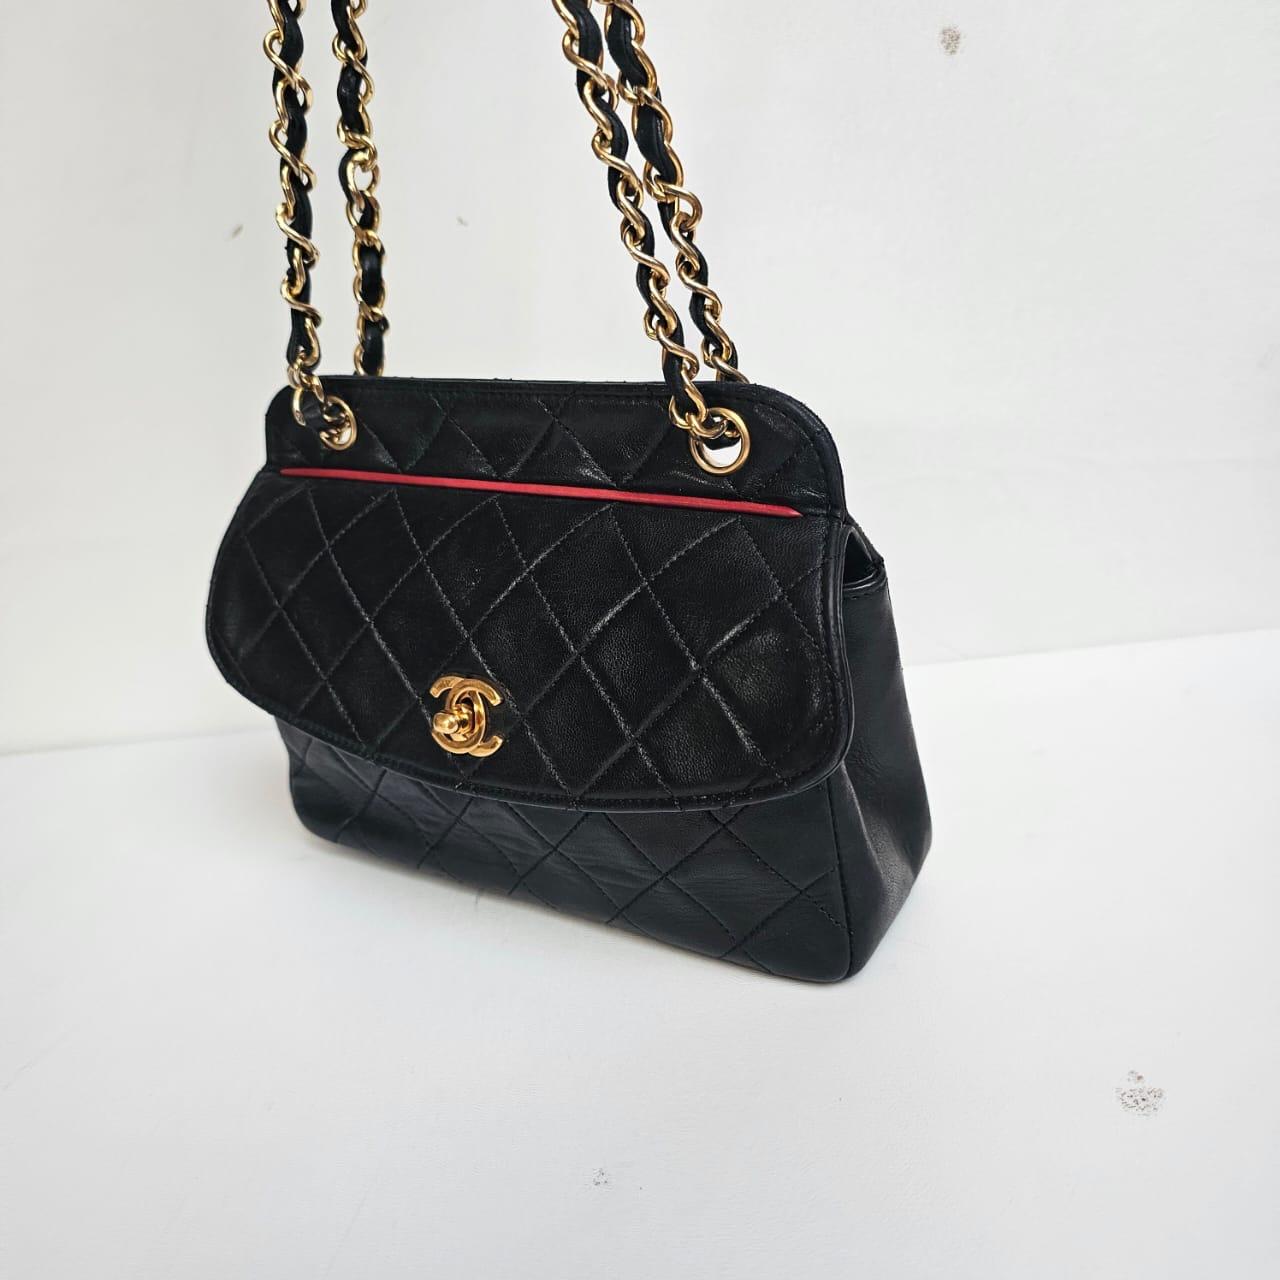 Vintage Chanel Black Lambskin Quilted Mini Flap Bag For Sale 1